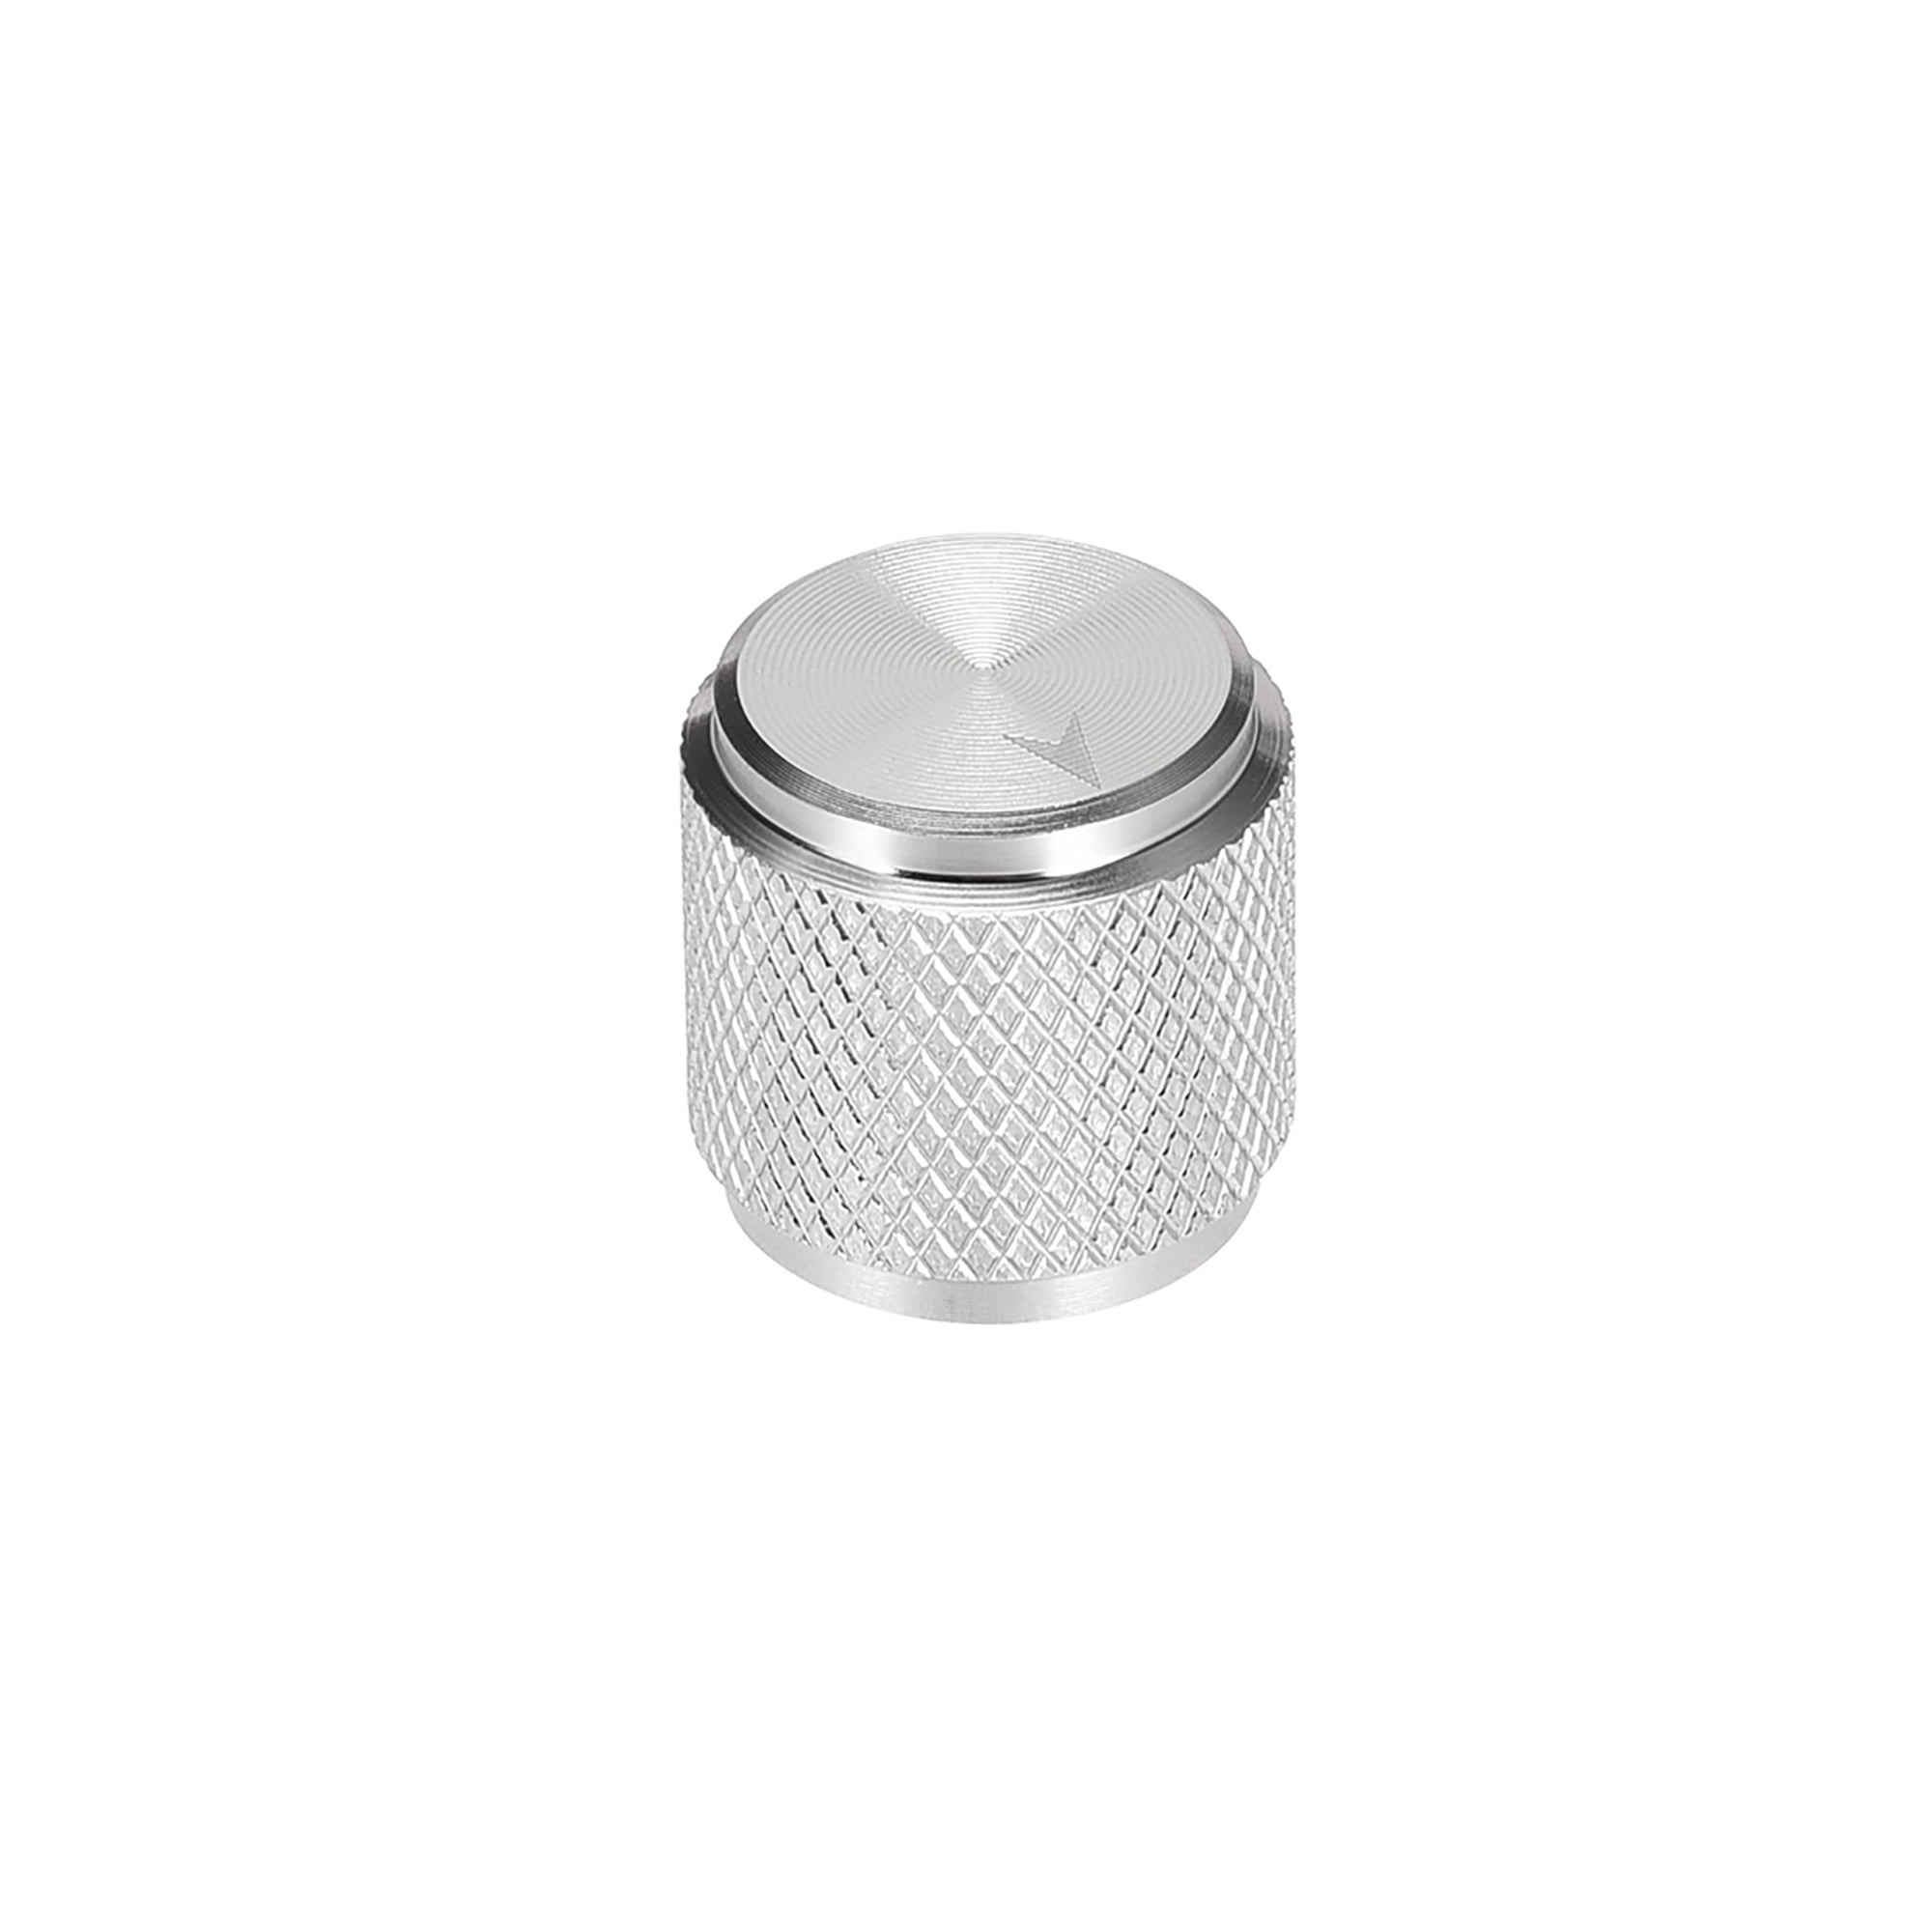 1/4" 6mm Shaft Silver or Gold 4 x Metal Top Control Knob for Marshall Amp